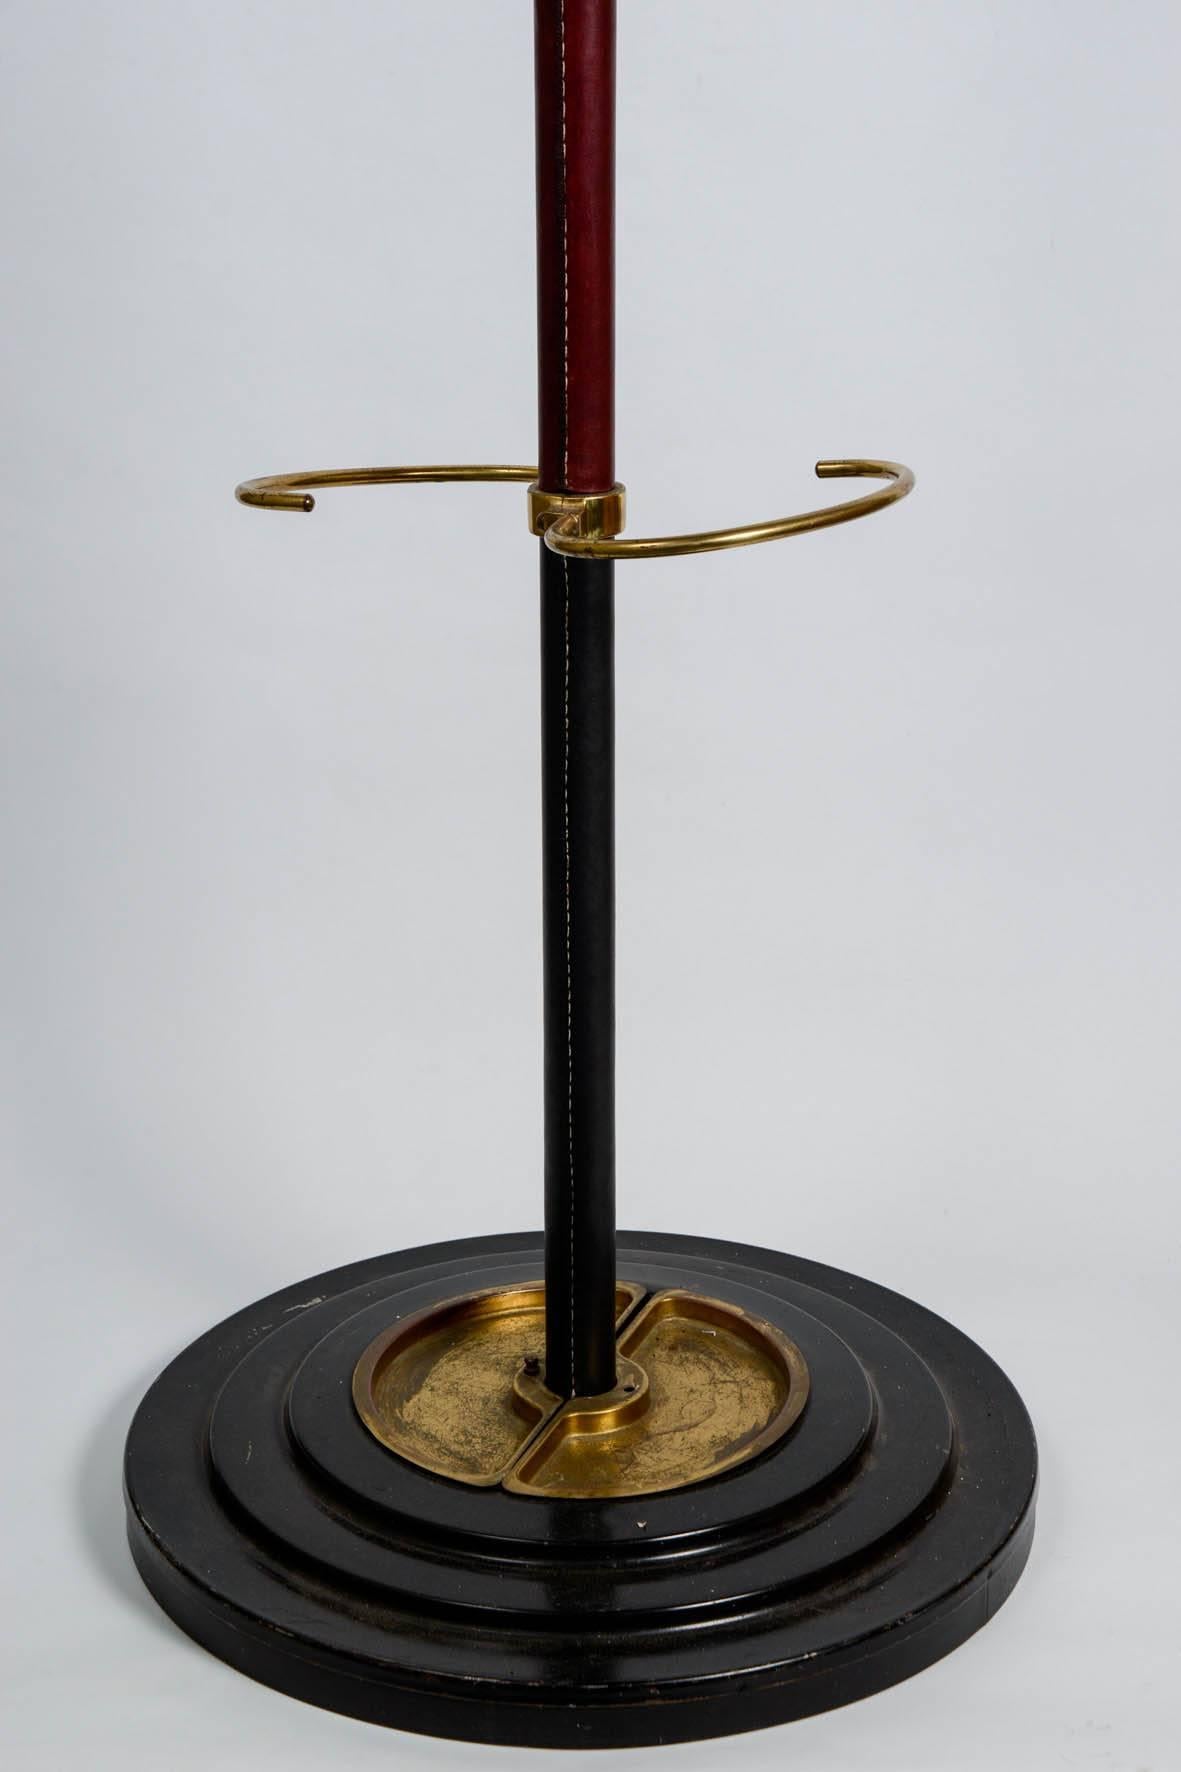 1950s stitched leather coat stand designed by Jacques Adnet.